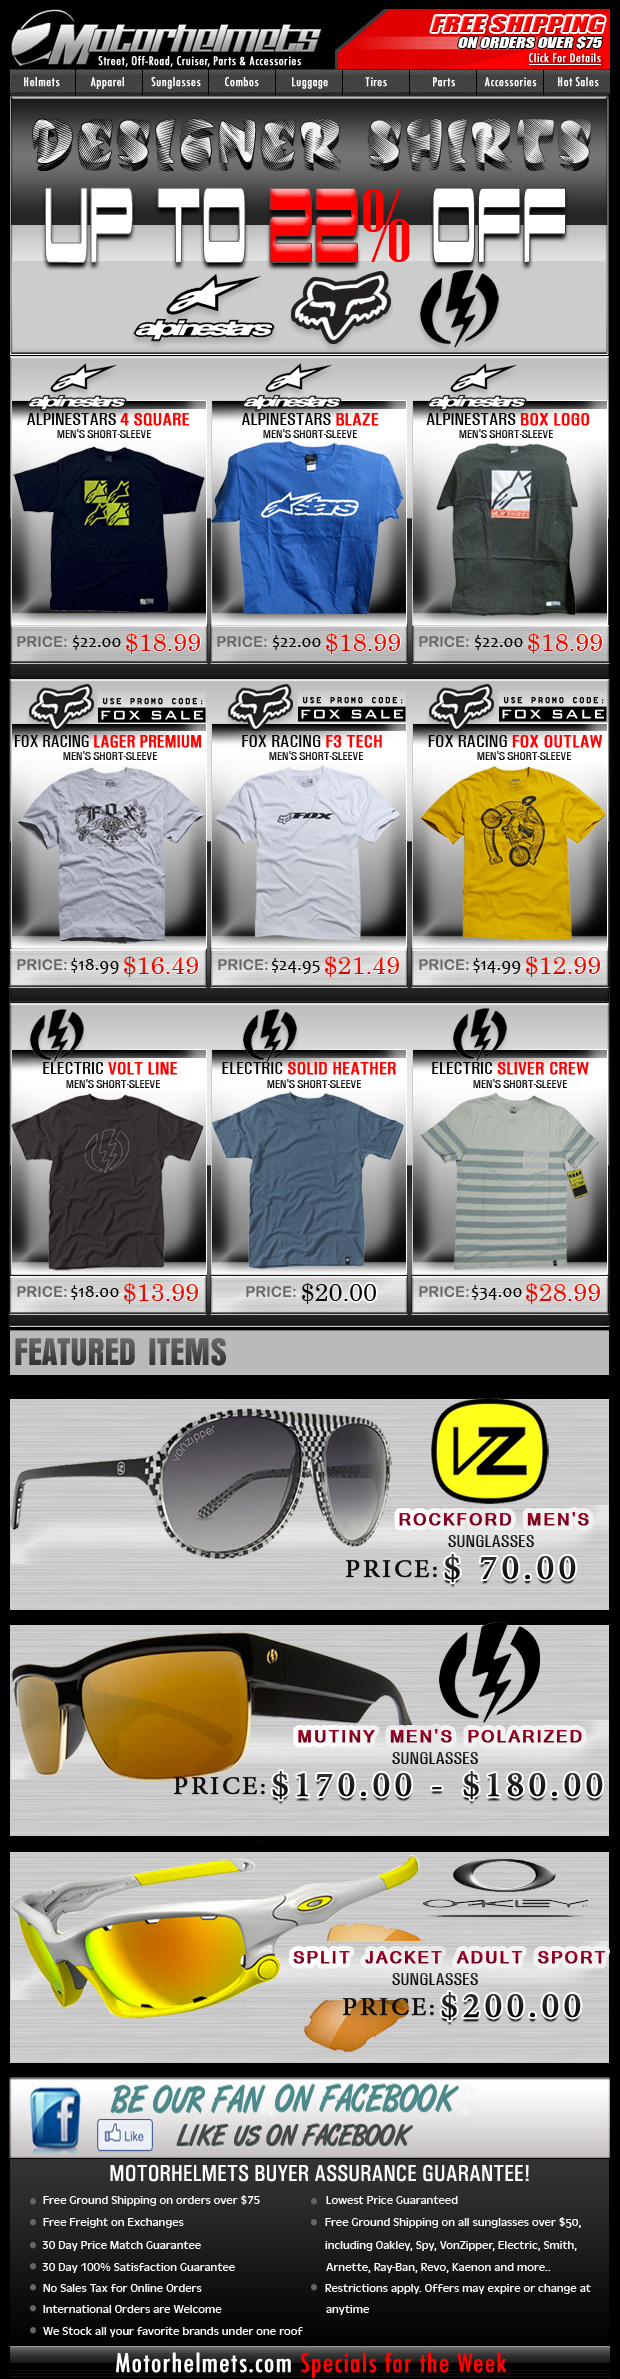 Save up to 22% off on Select Premium Tees from Alpinestars, Fox and Electric!